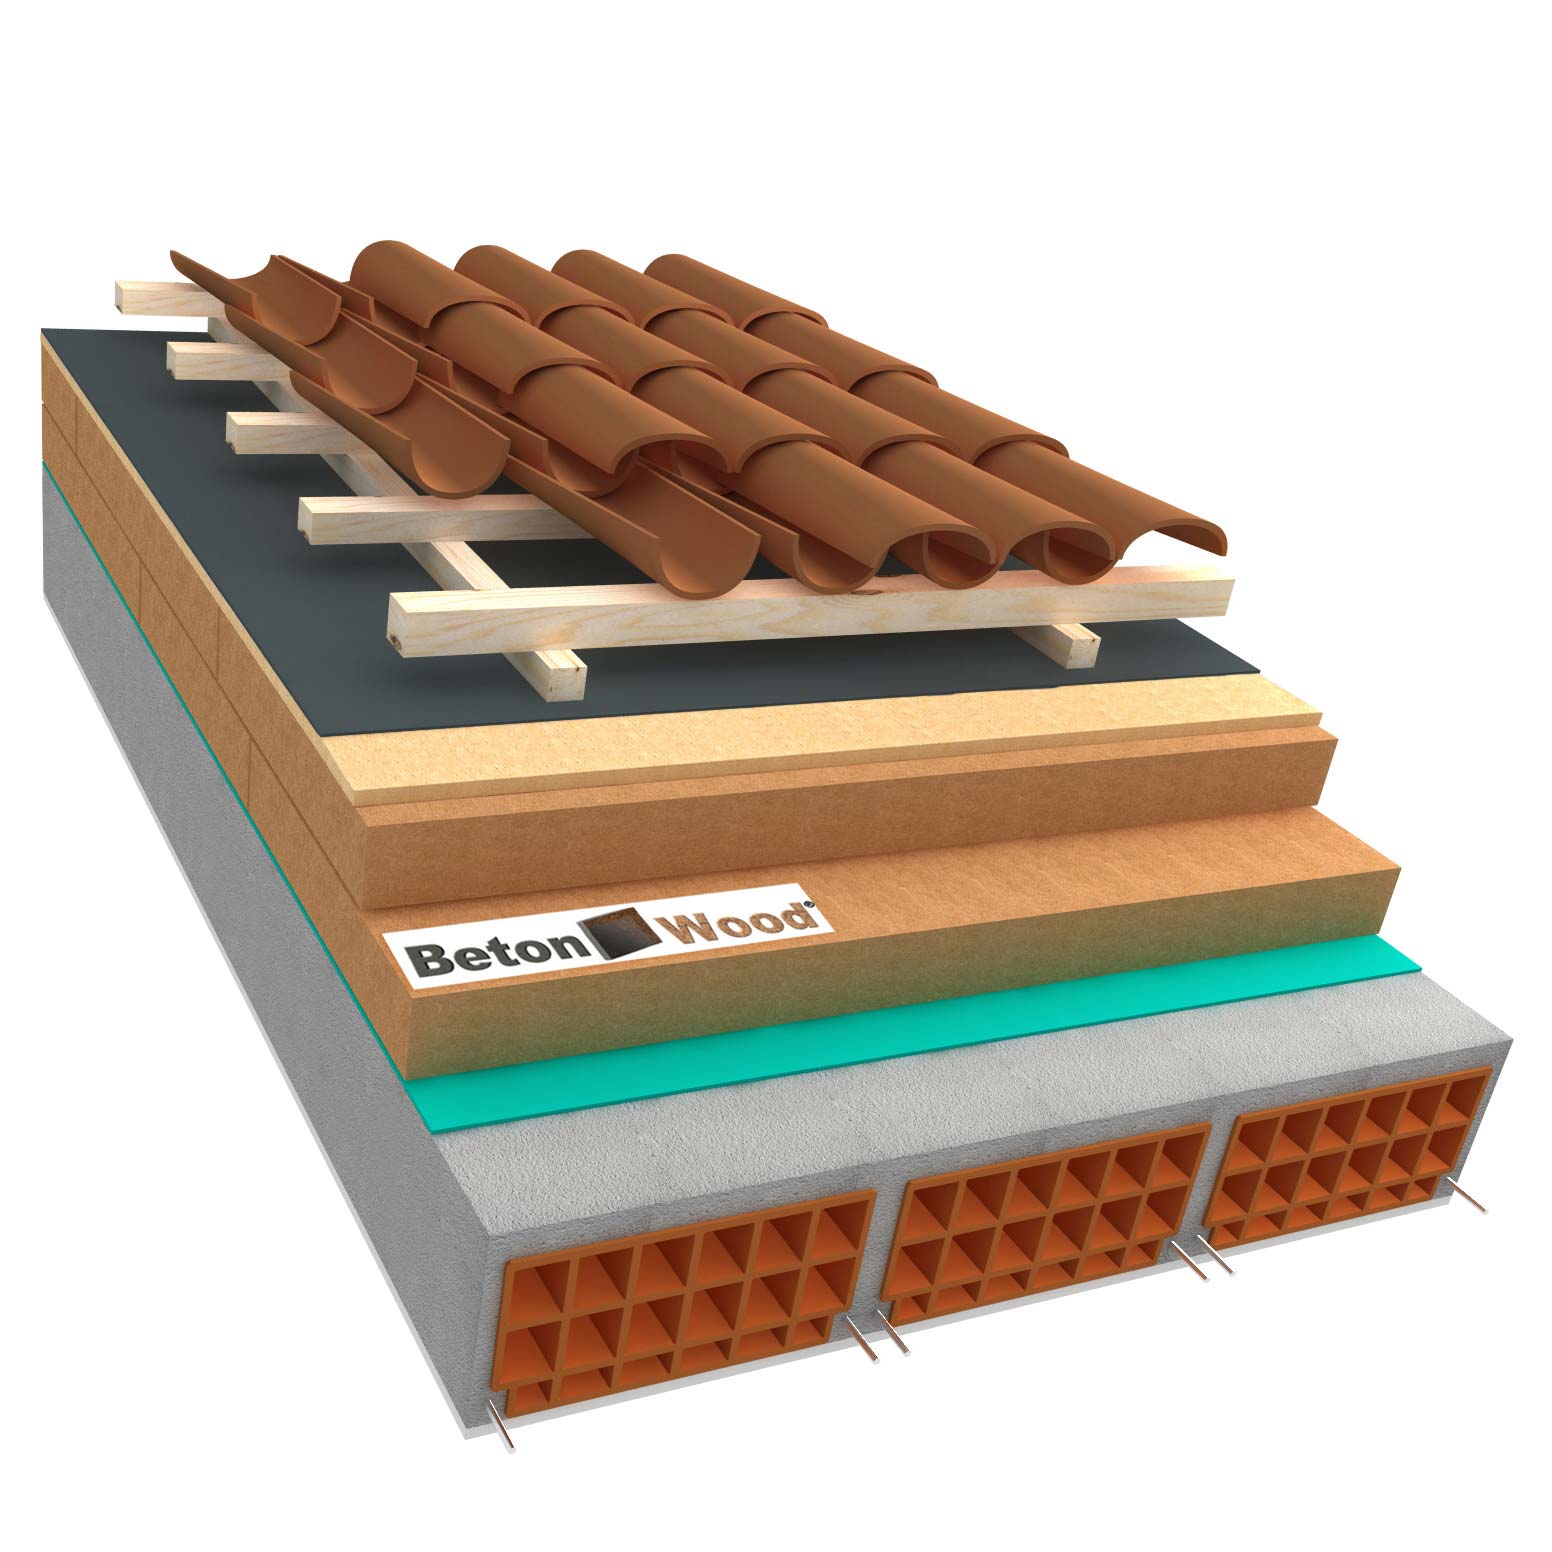 Ventilated roof with wood fiber Isorel and Universal on concrete